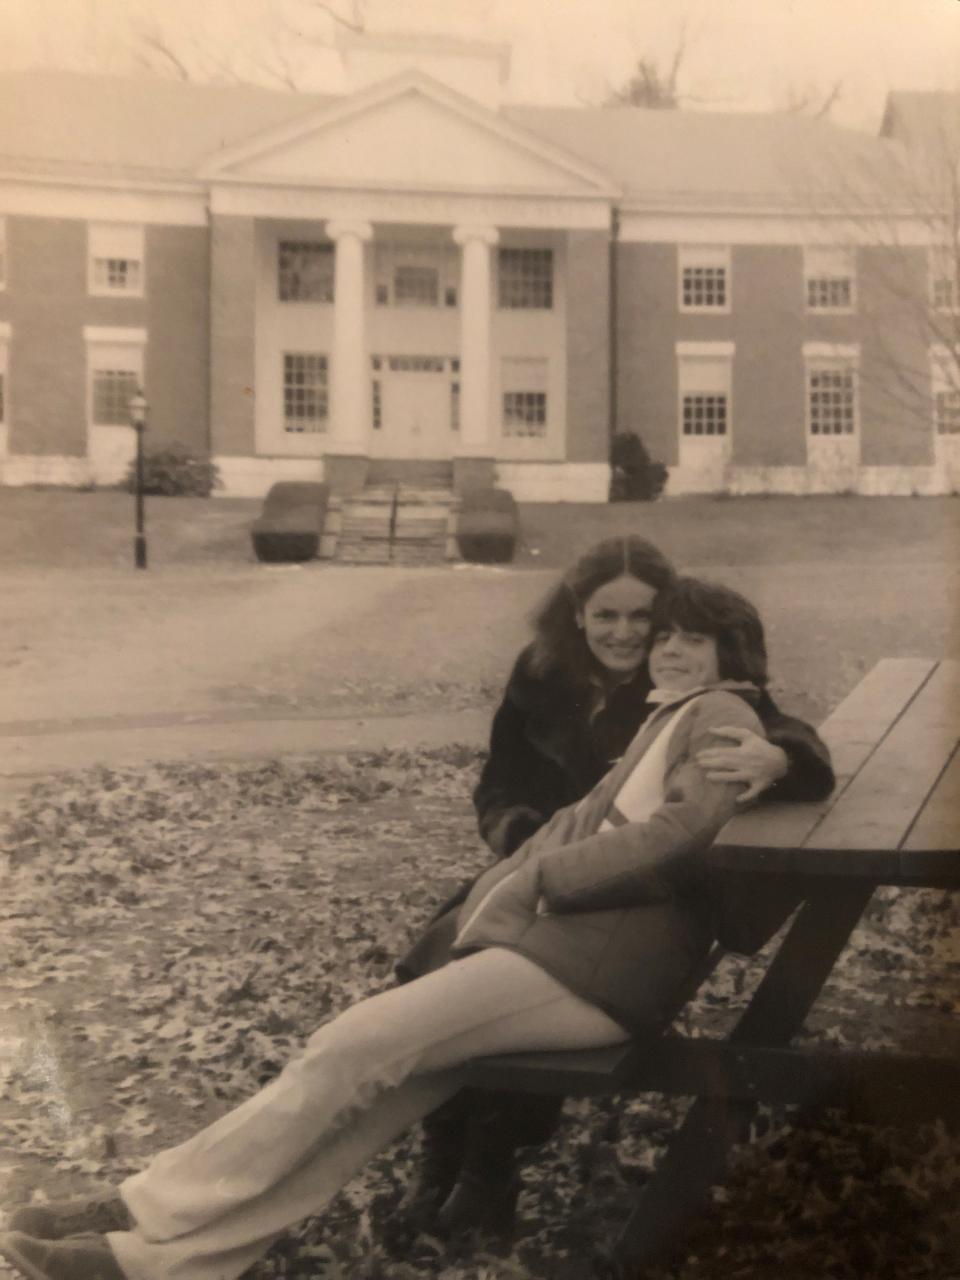 Benigno Trigo poses in the arms of his mother at a college in New England in 1980.